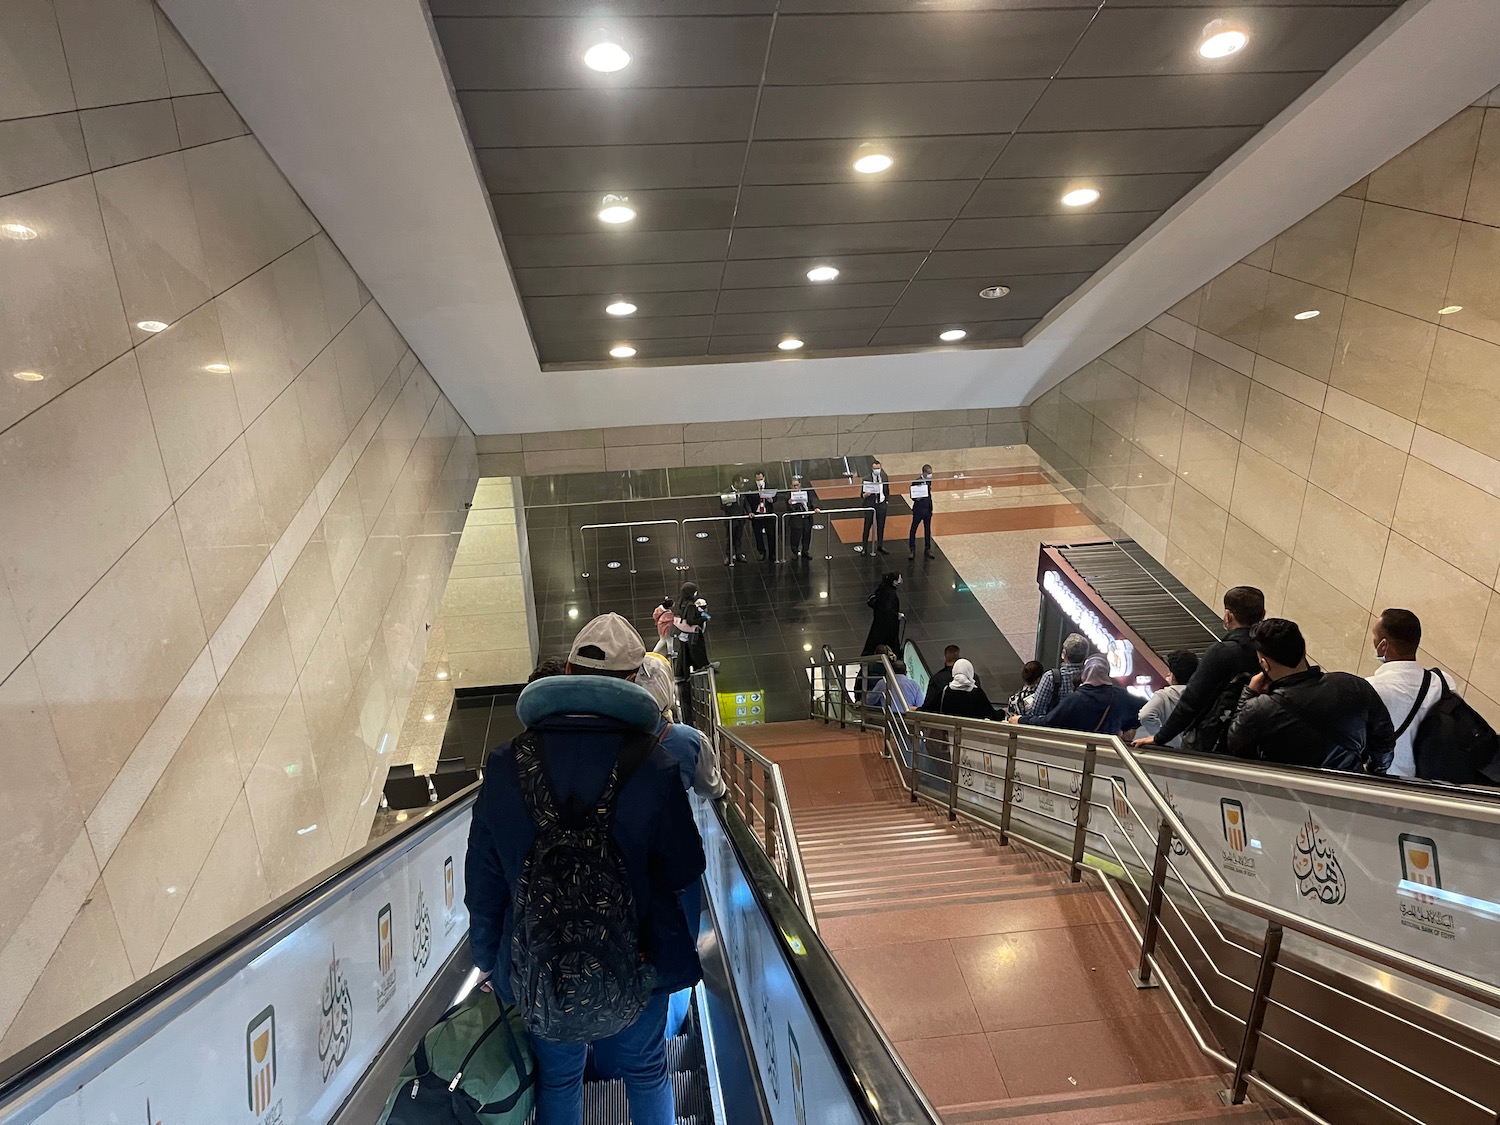 a group of people on escalators